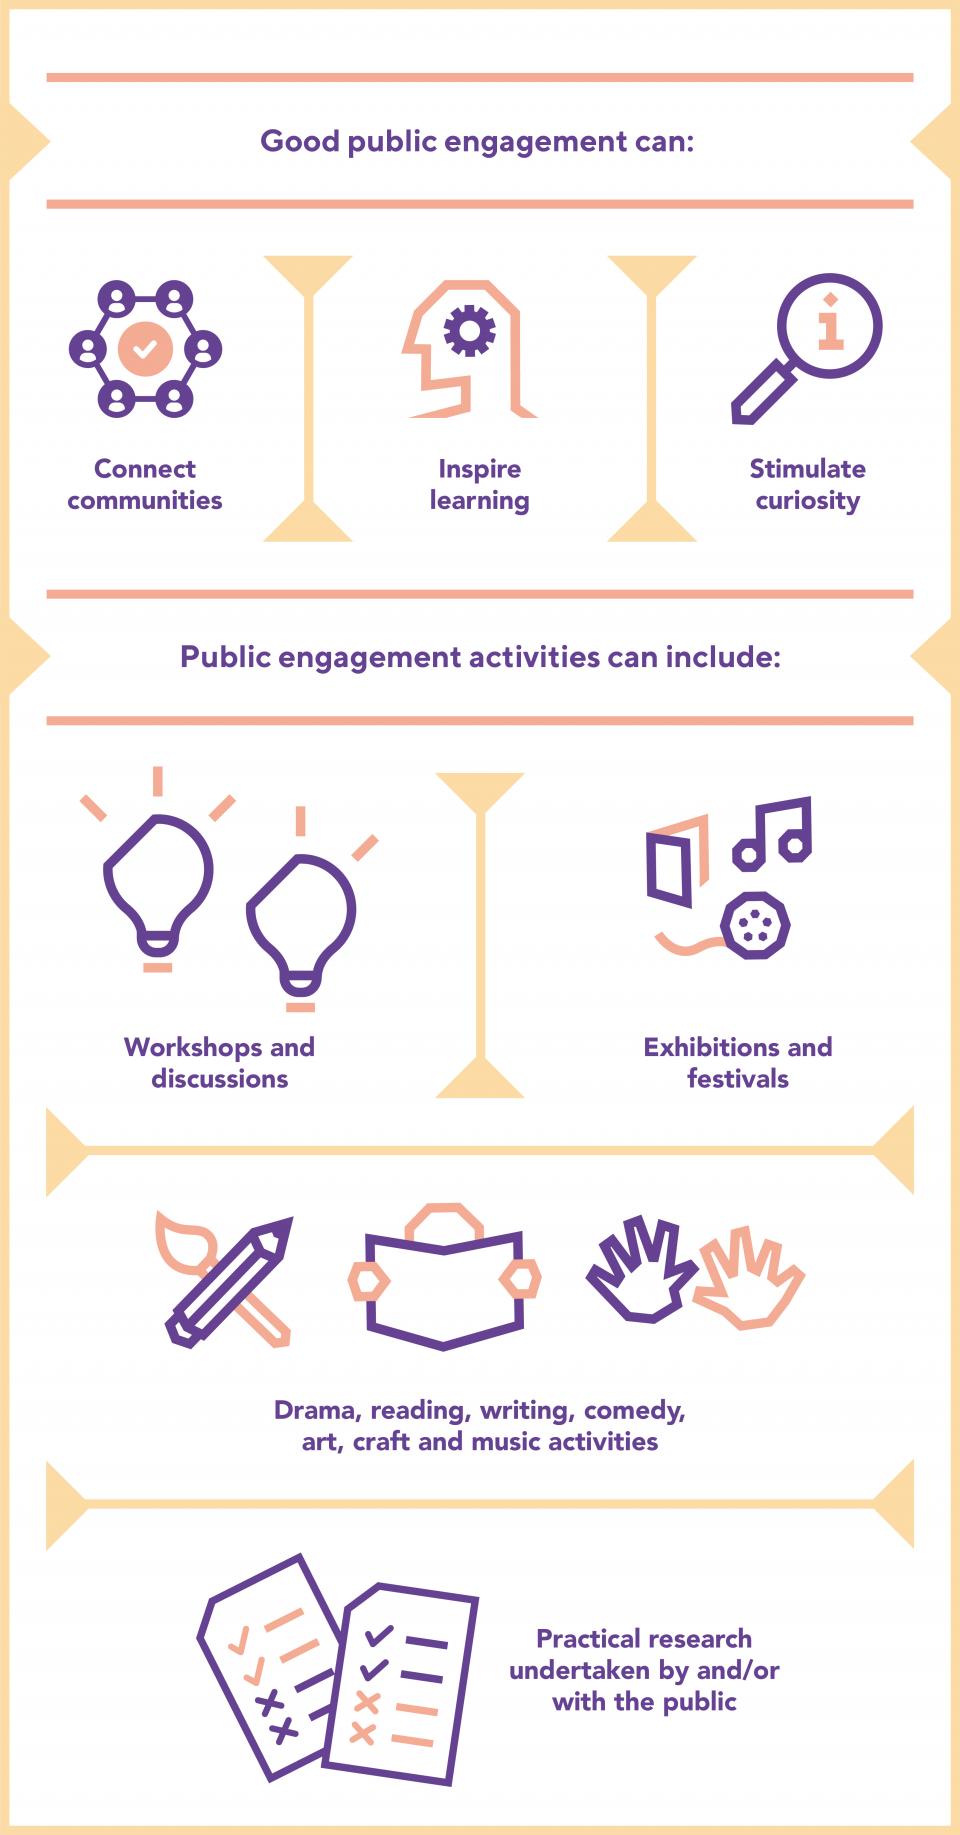 Public engagement as a two way process